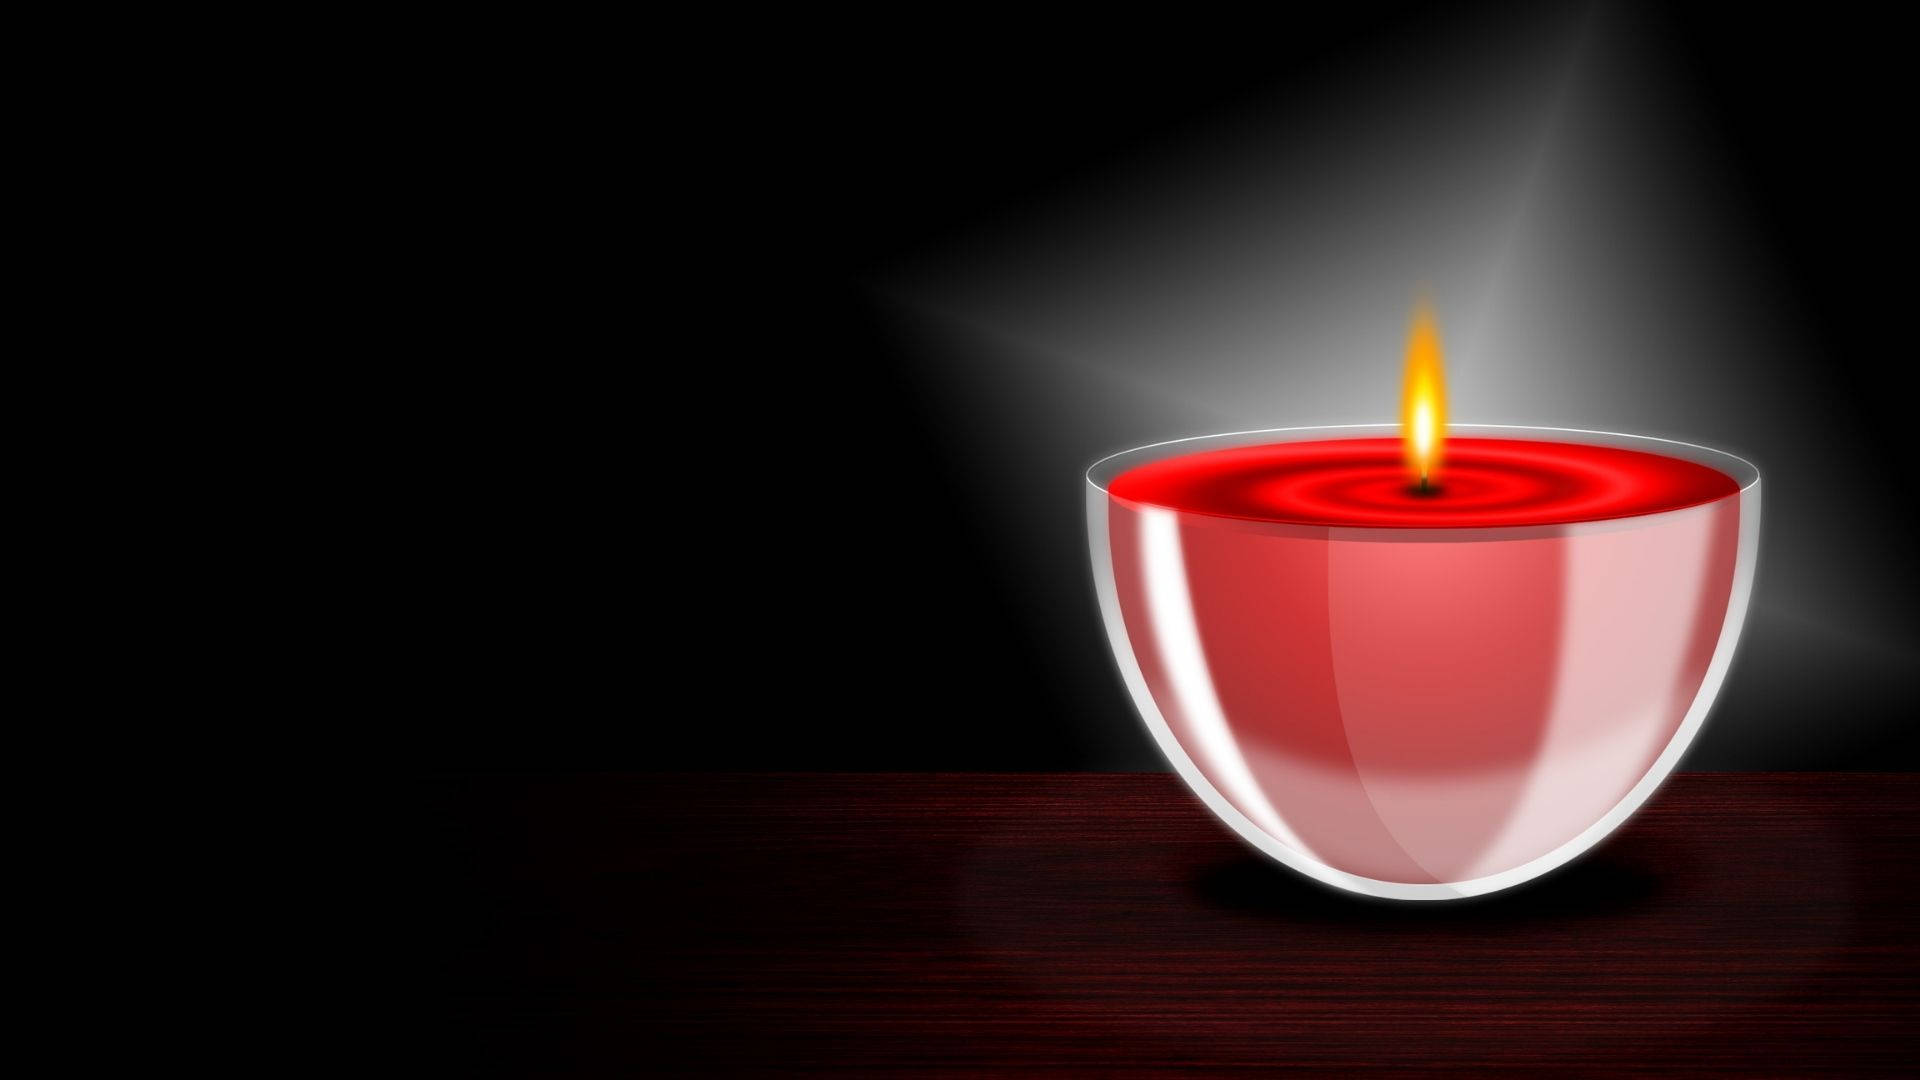 Red Candle Artwork Wallpaper